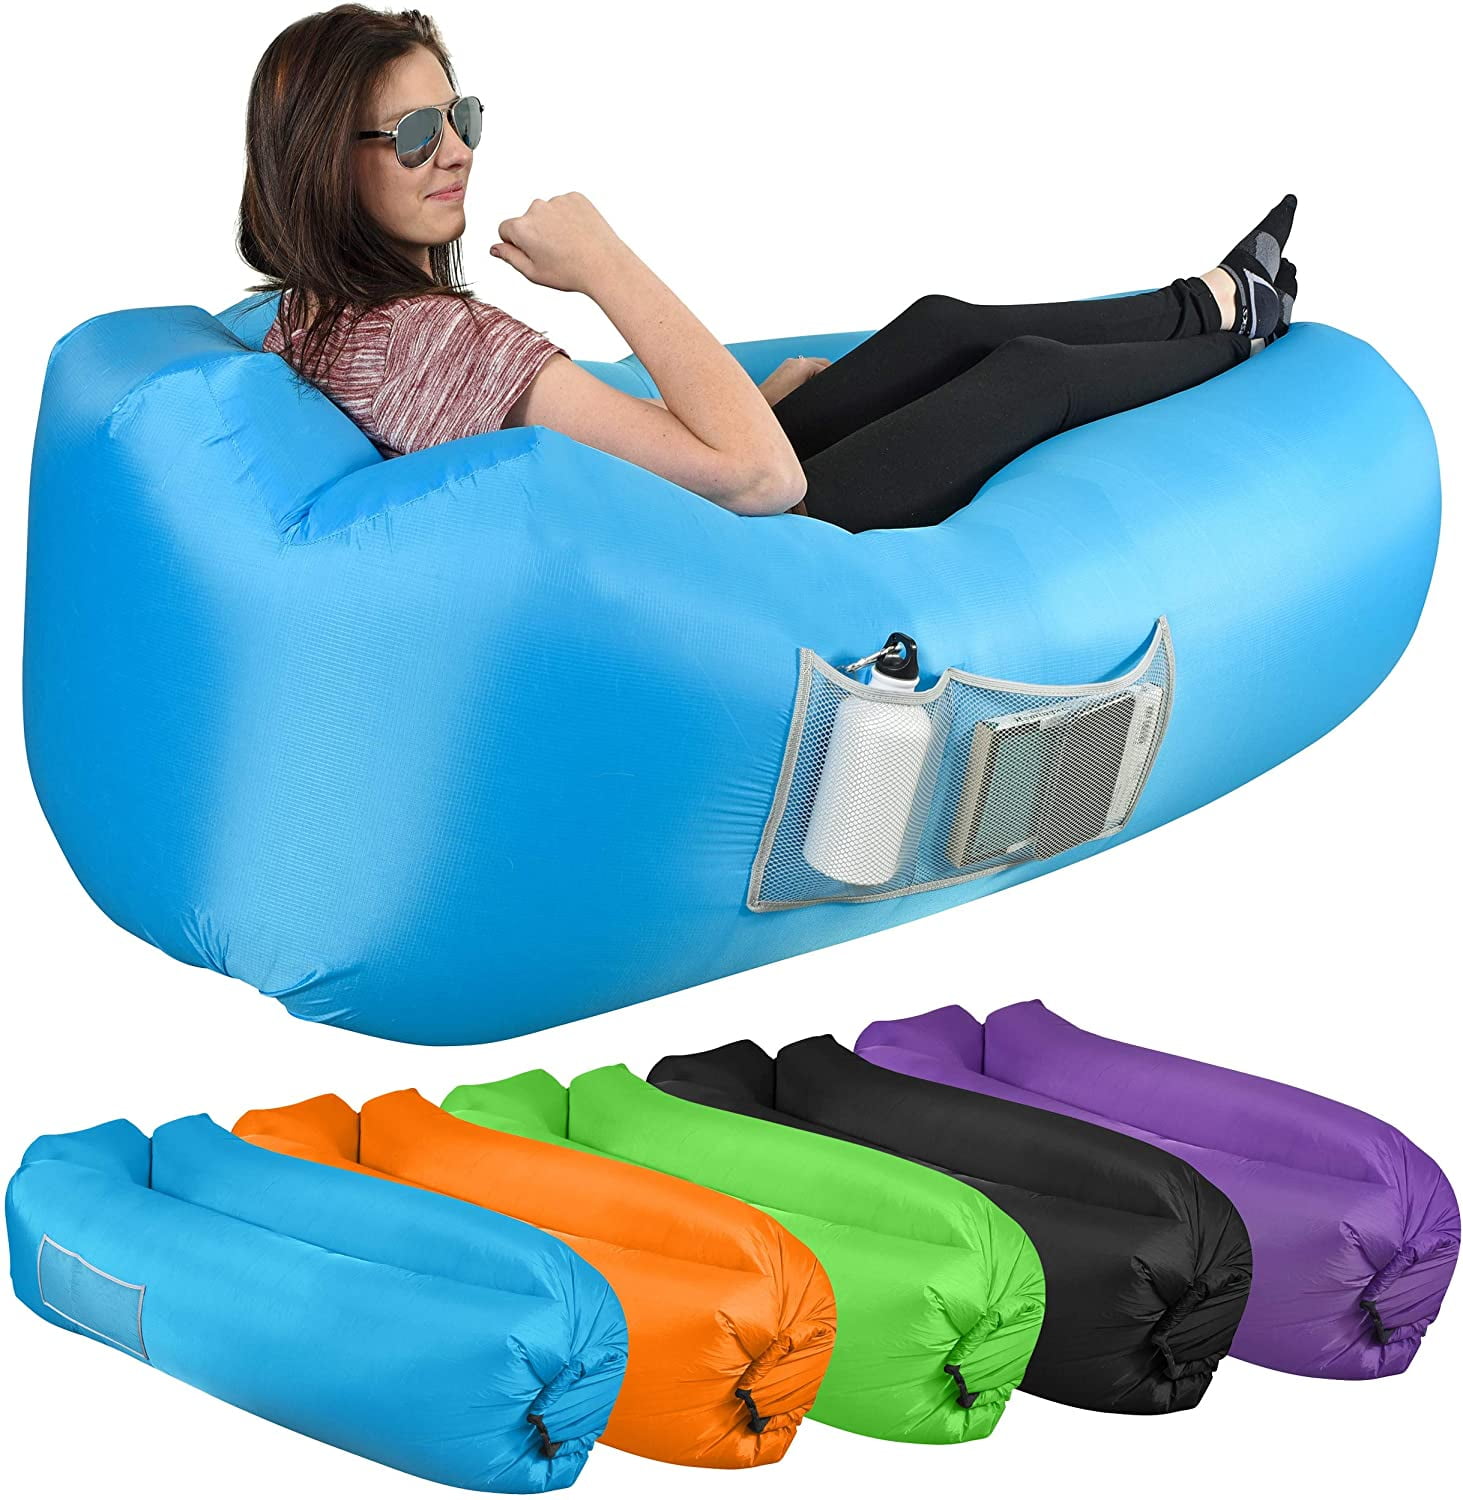 Waterproof Inflatable Couch for Swimming Pool Park and Beach Air Sofa Bed Hammock with Carry bag Portable Inflatable Sofa Air Lounger Travelling Camping Tomight Inflatable Lounger 